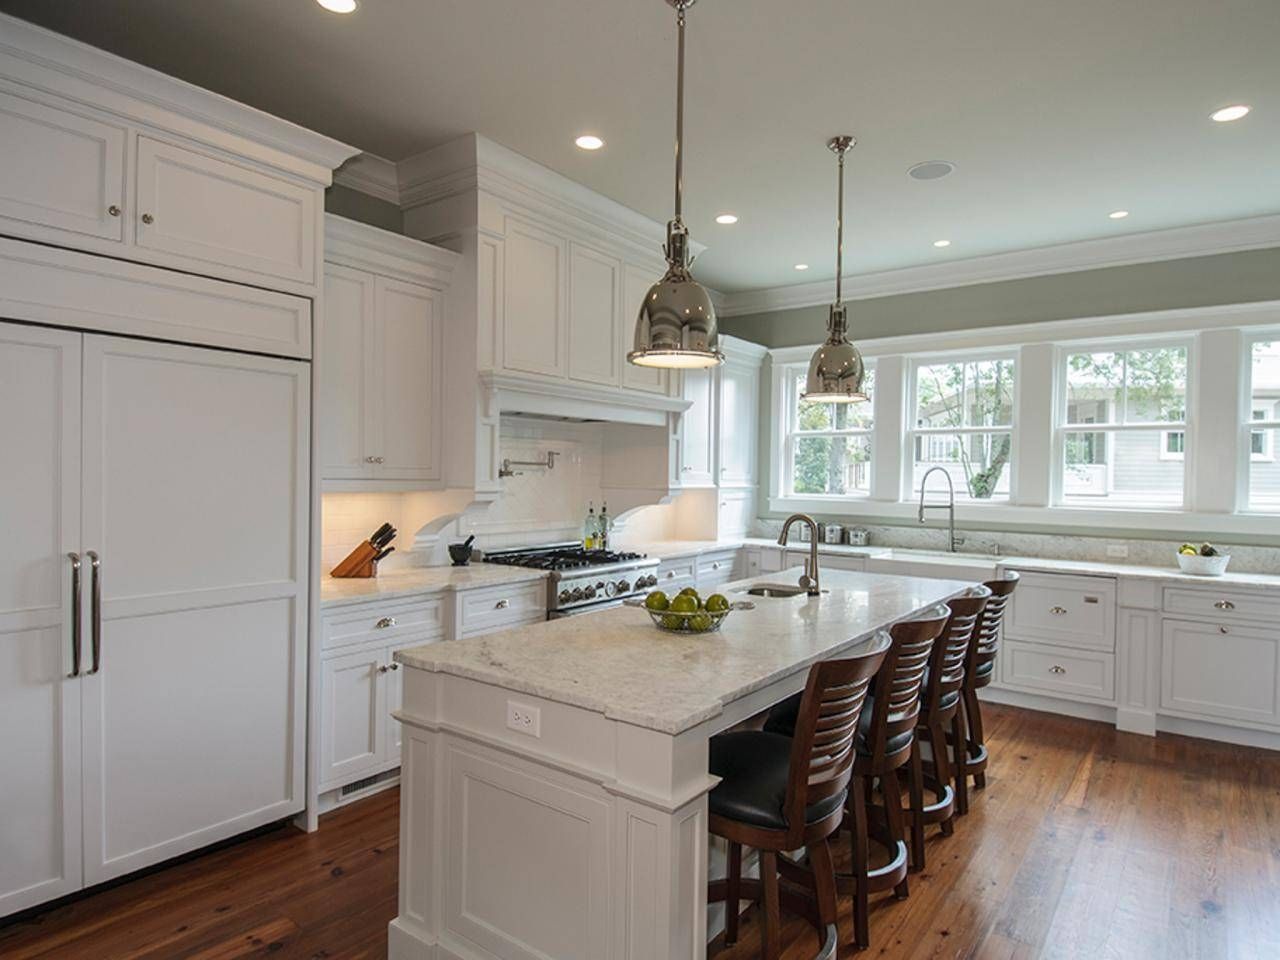 Silver Kitchen Pendant Lighting Image | The Latest Information Within Silver Kitchen Pendant Lighting (Photo 2 of 15)